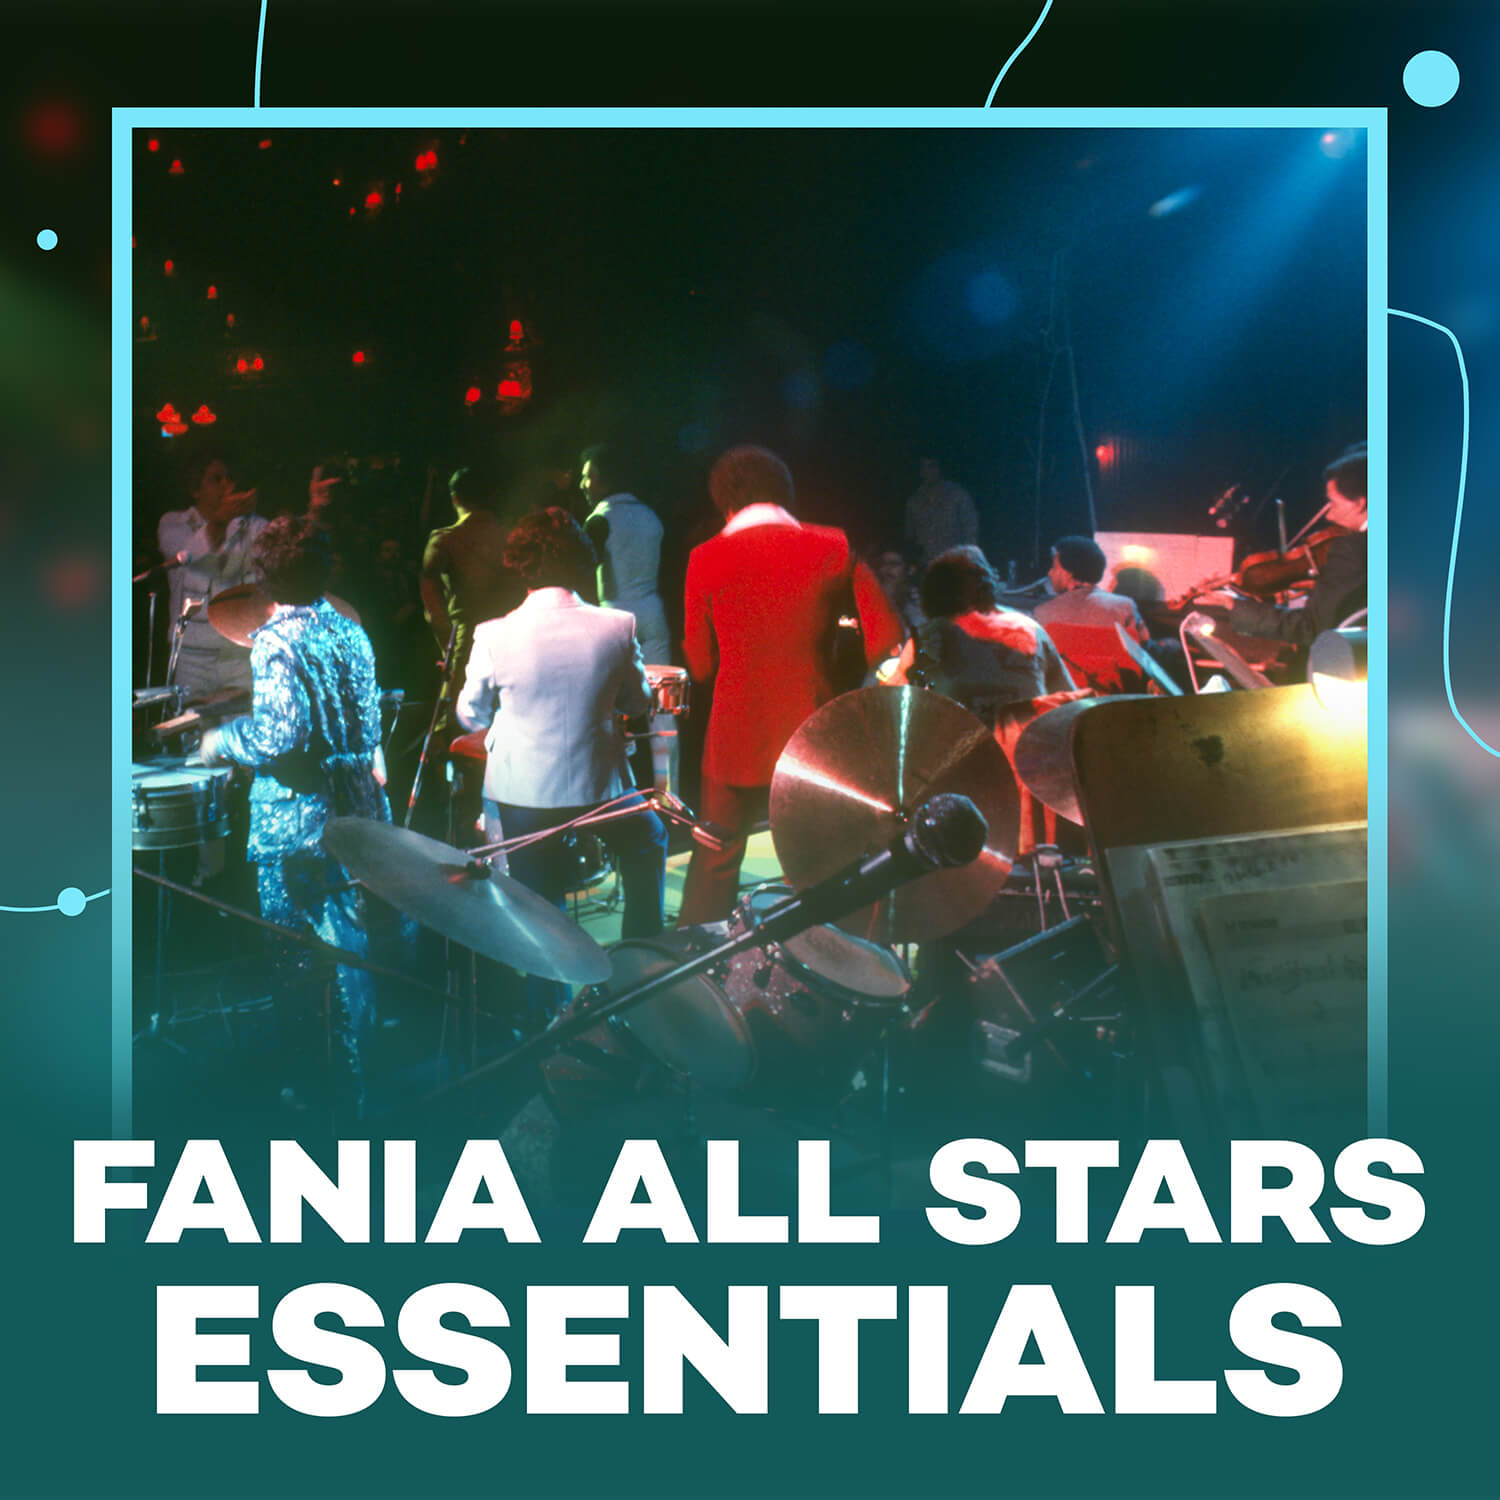 Featured image for “Fania All Stars”